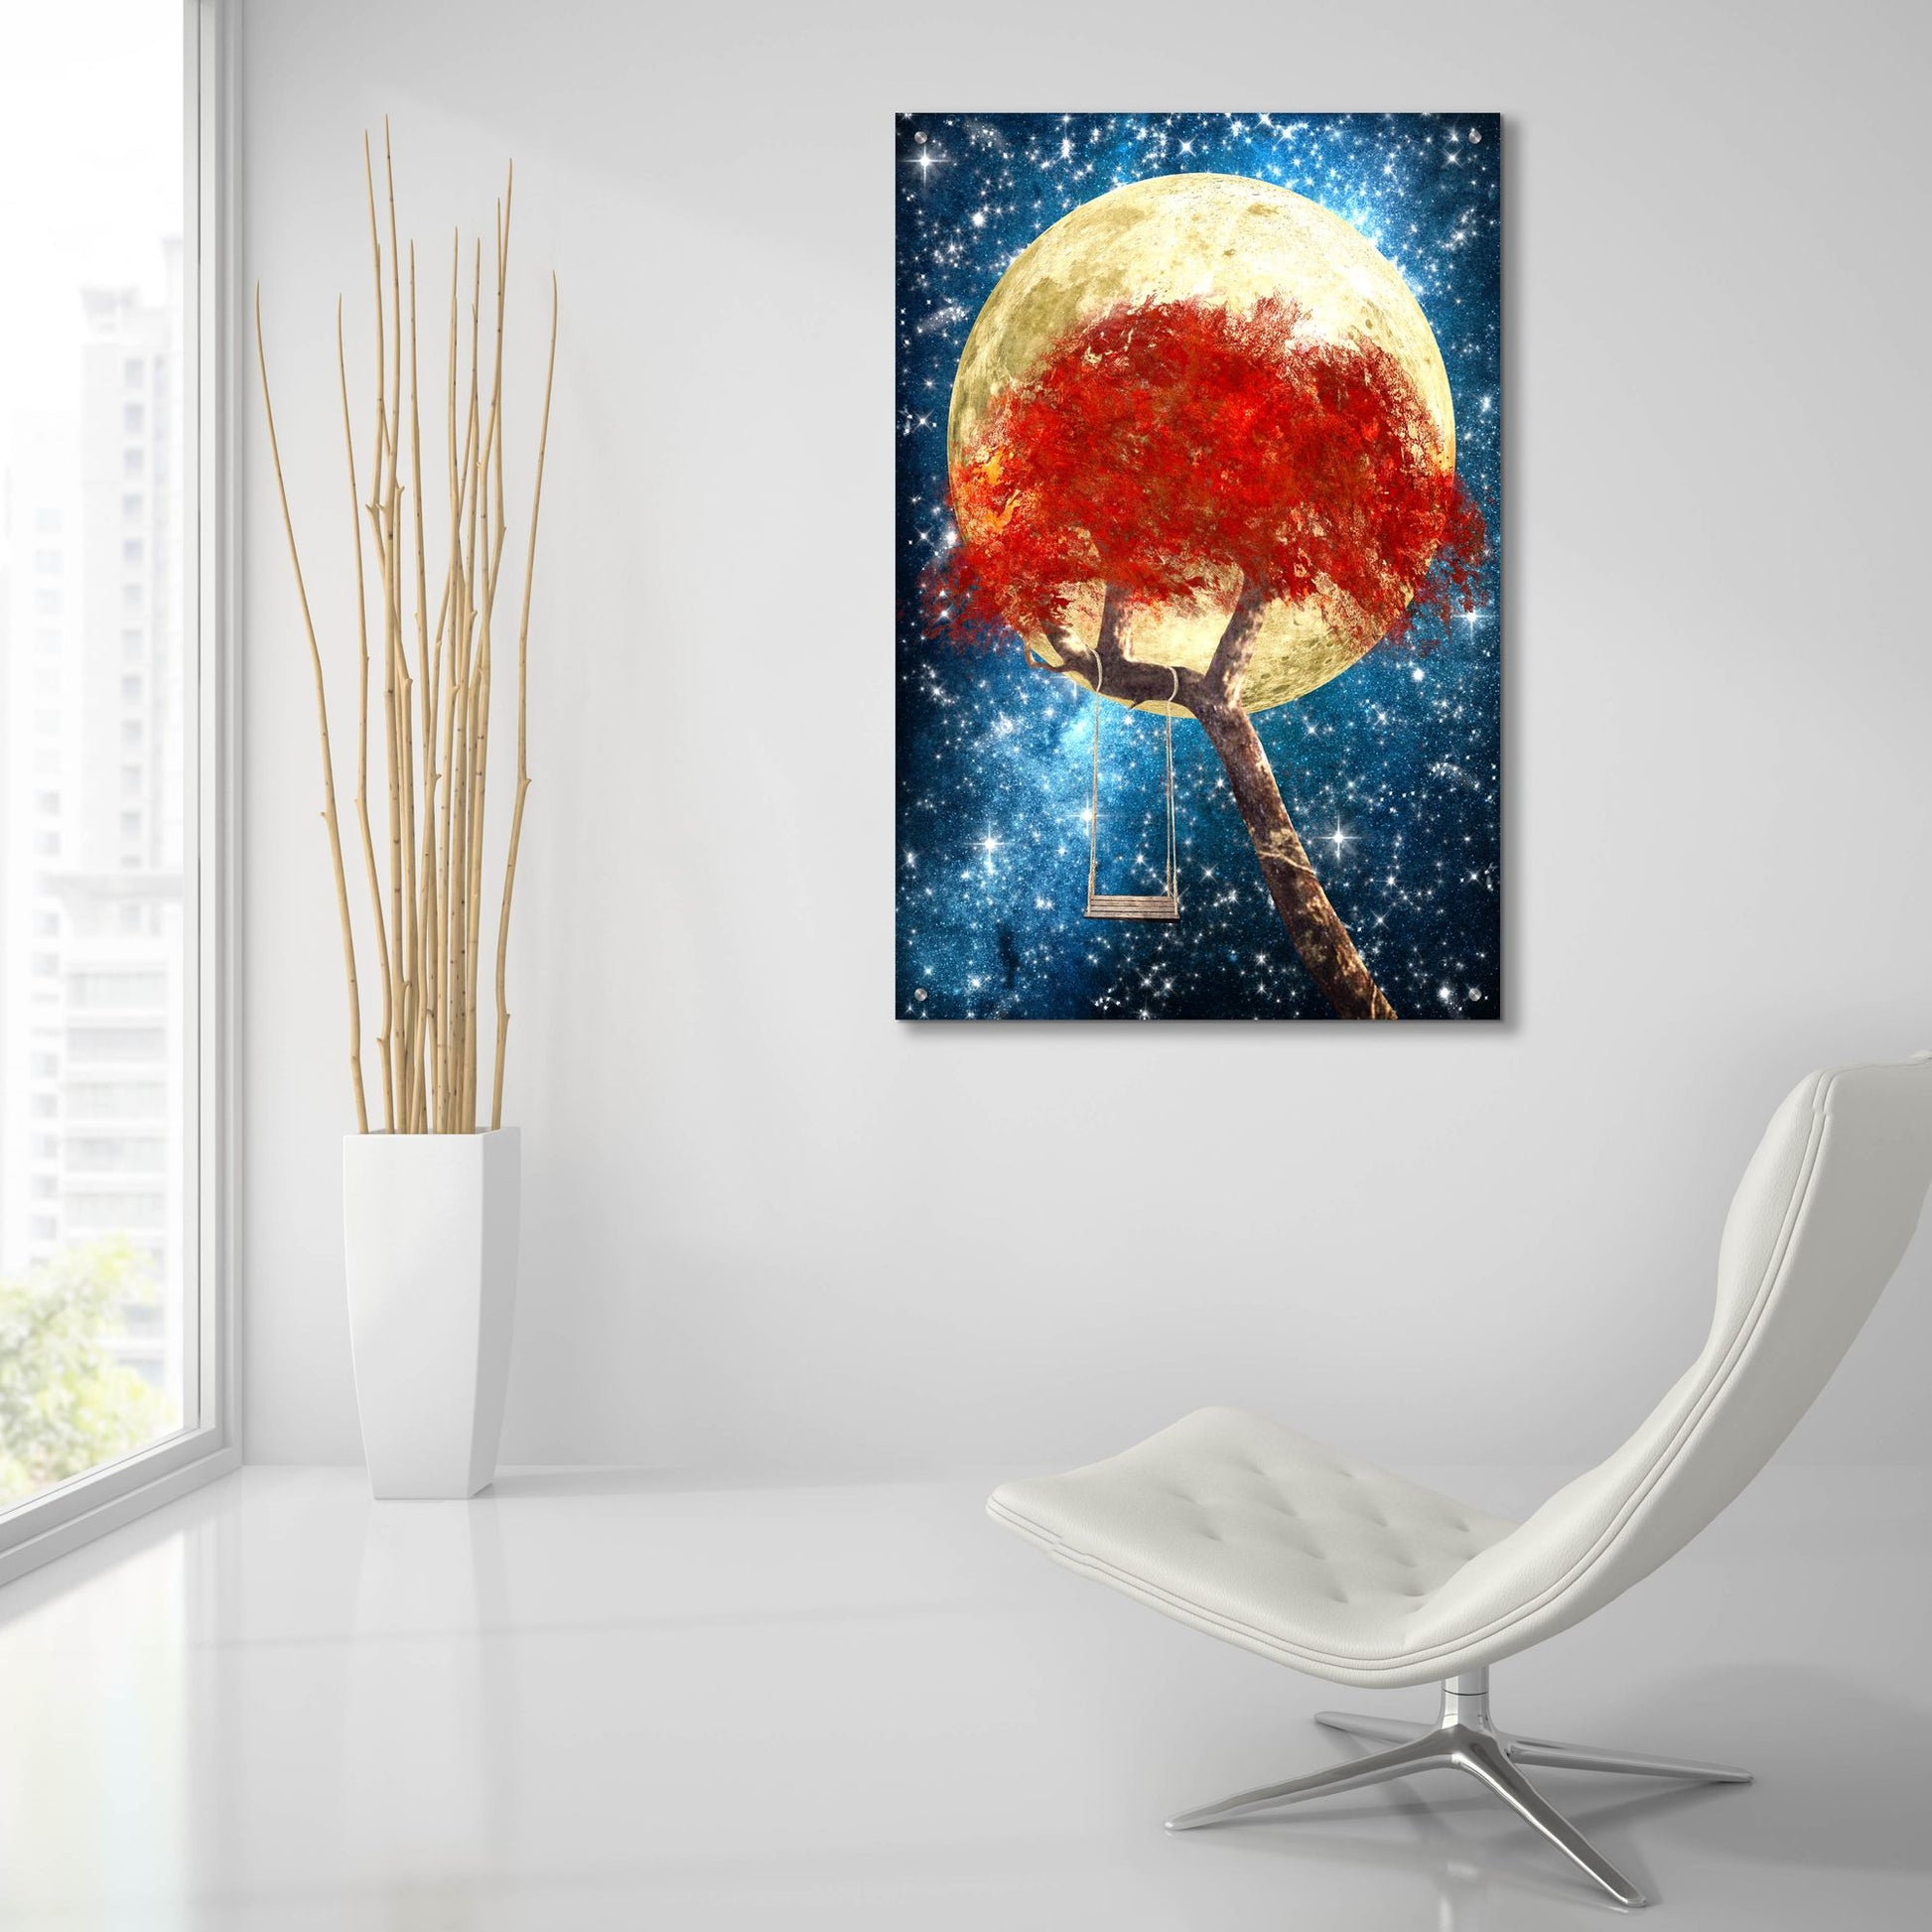 Epic Art 'Swing Under a Golden Moonlight' by Diogo Verissimo, Acrylic Glass Wall Art,24x36